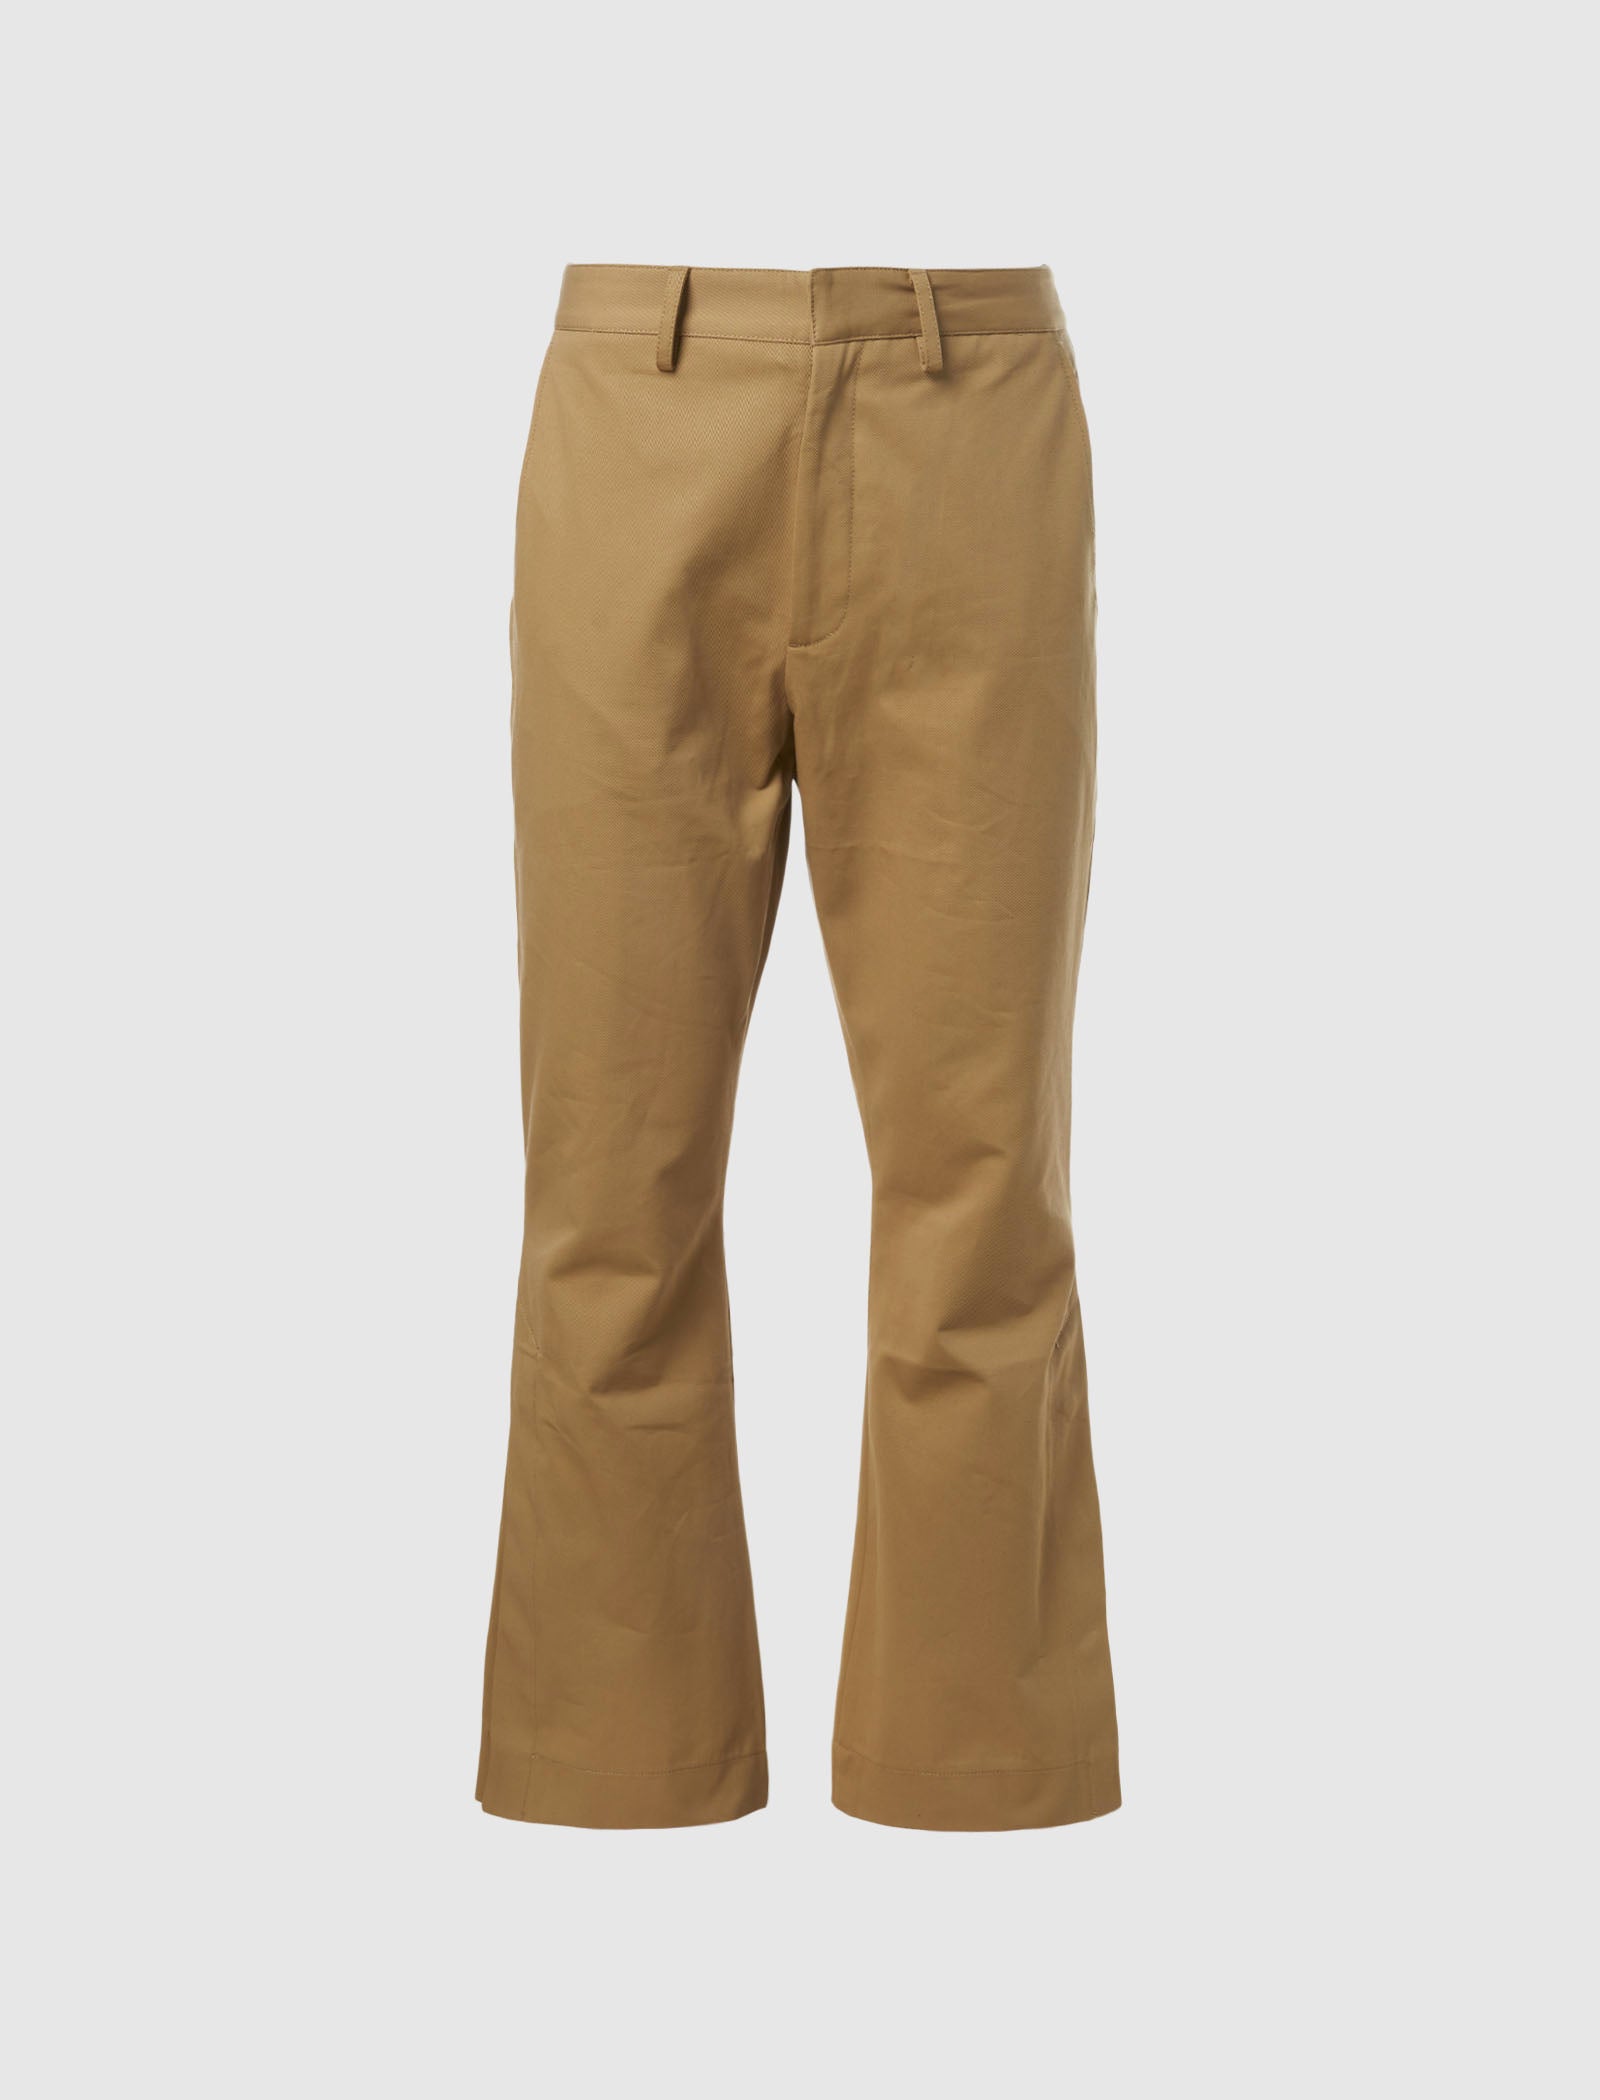 Brown Flare Cargo Pants by AMIRI on Sale